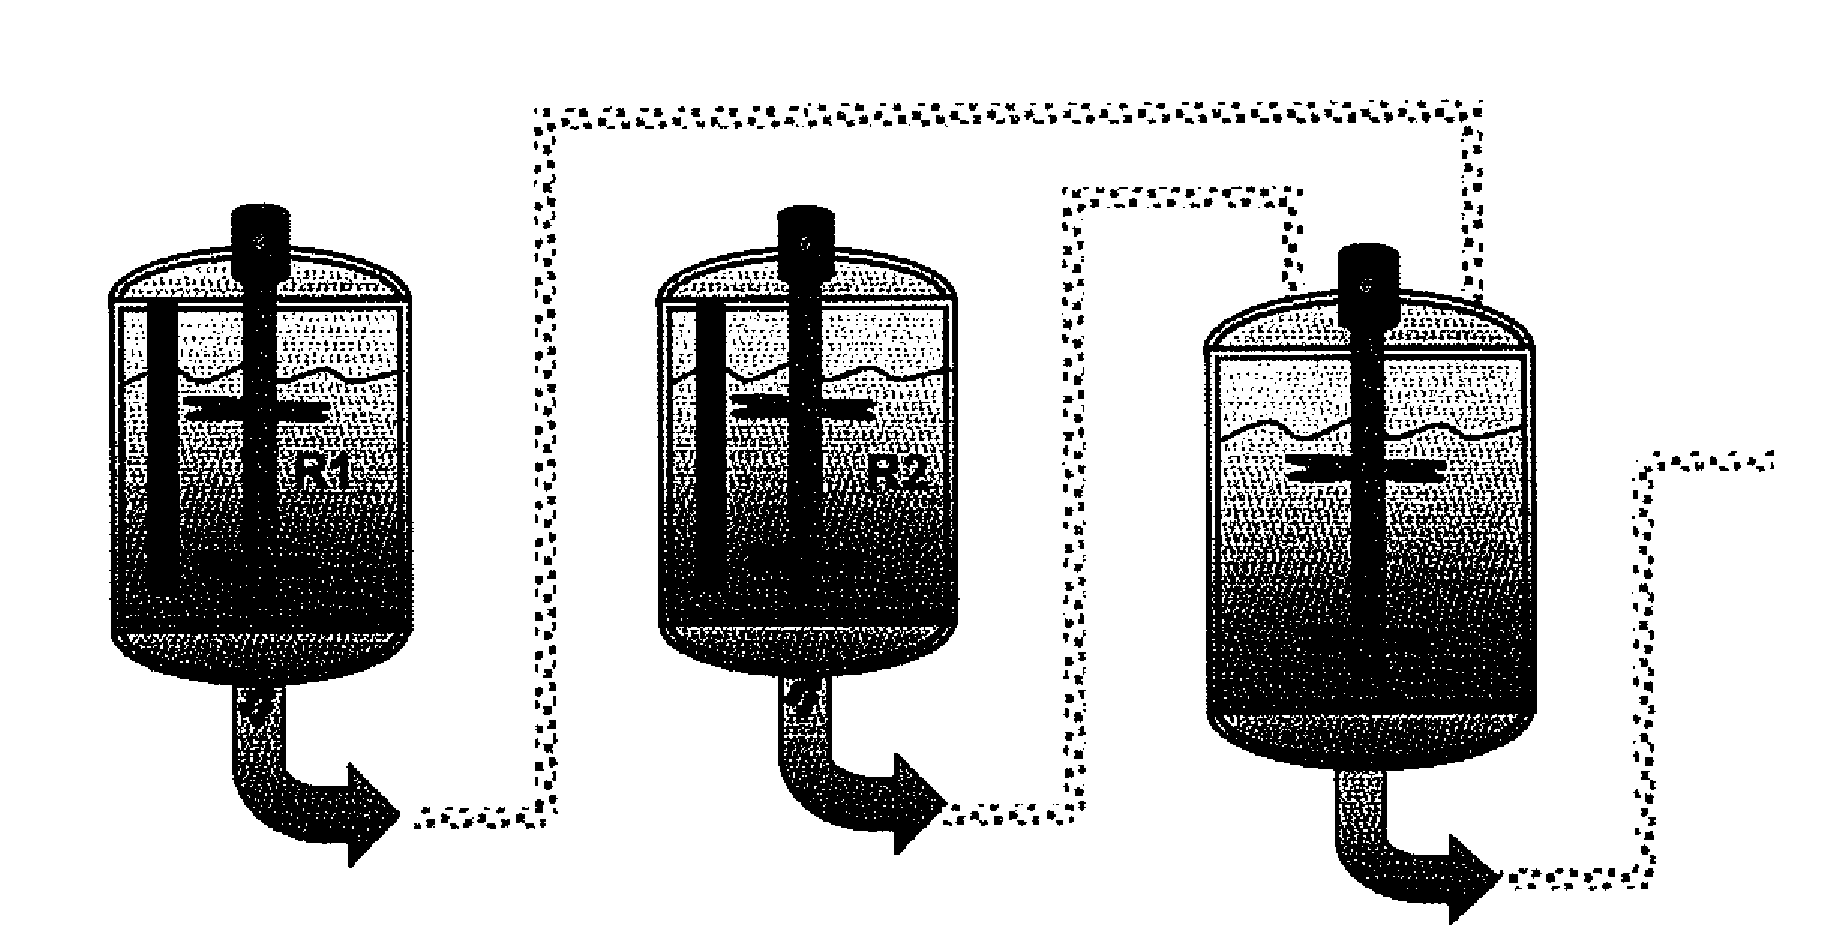 Suspension polymerization process for manufacturing ultra high molecular weight polyethylene, a multimodal ultra high molecular weight polyethylene homopolymeric or copolymeric composition, a ultra high molecular weight polyethylene, and their uses